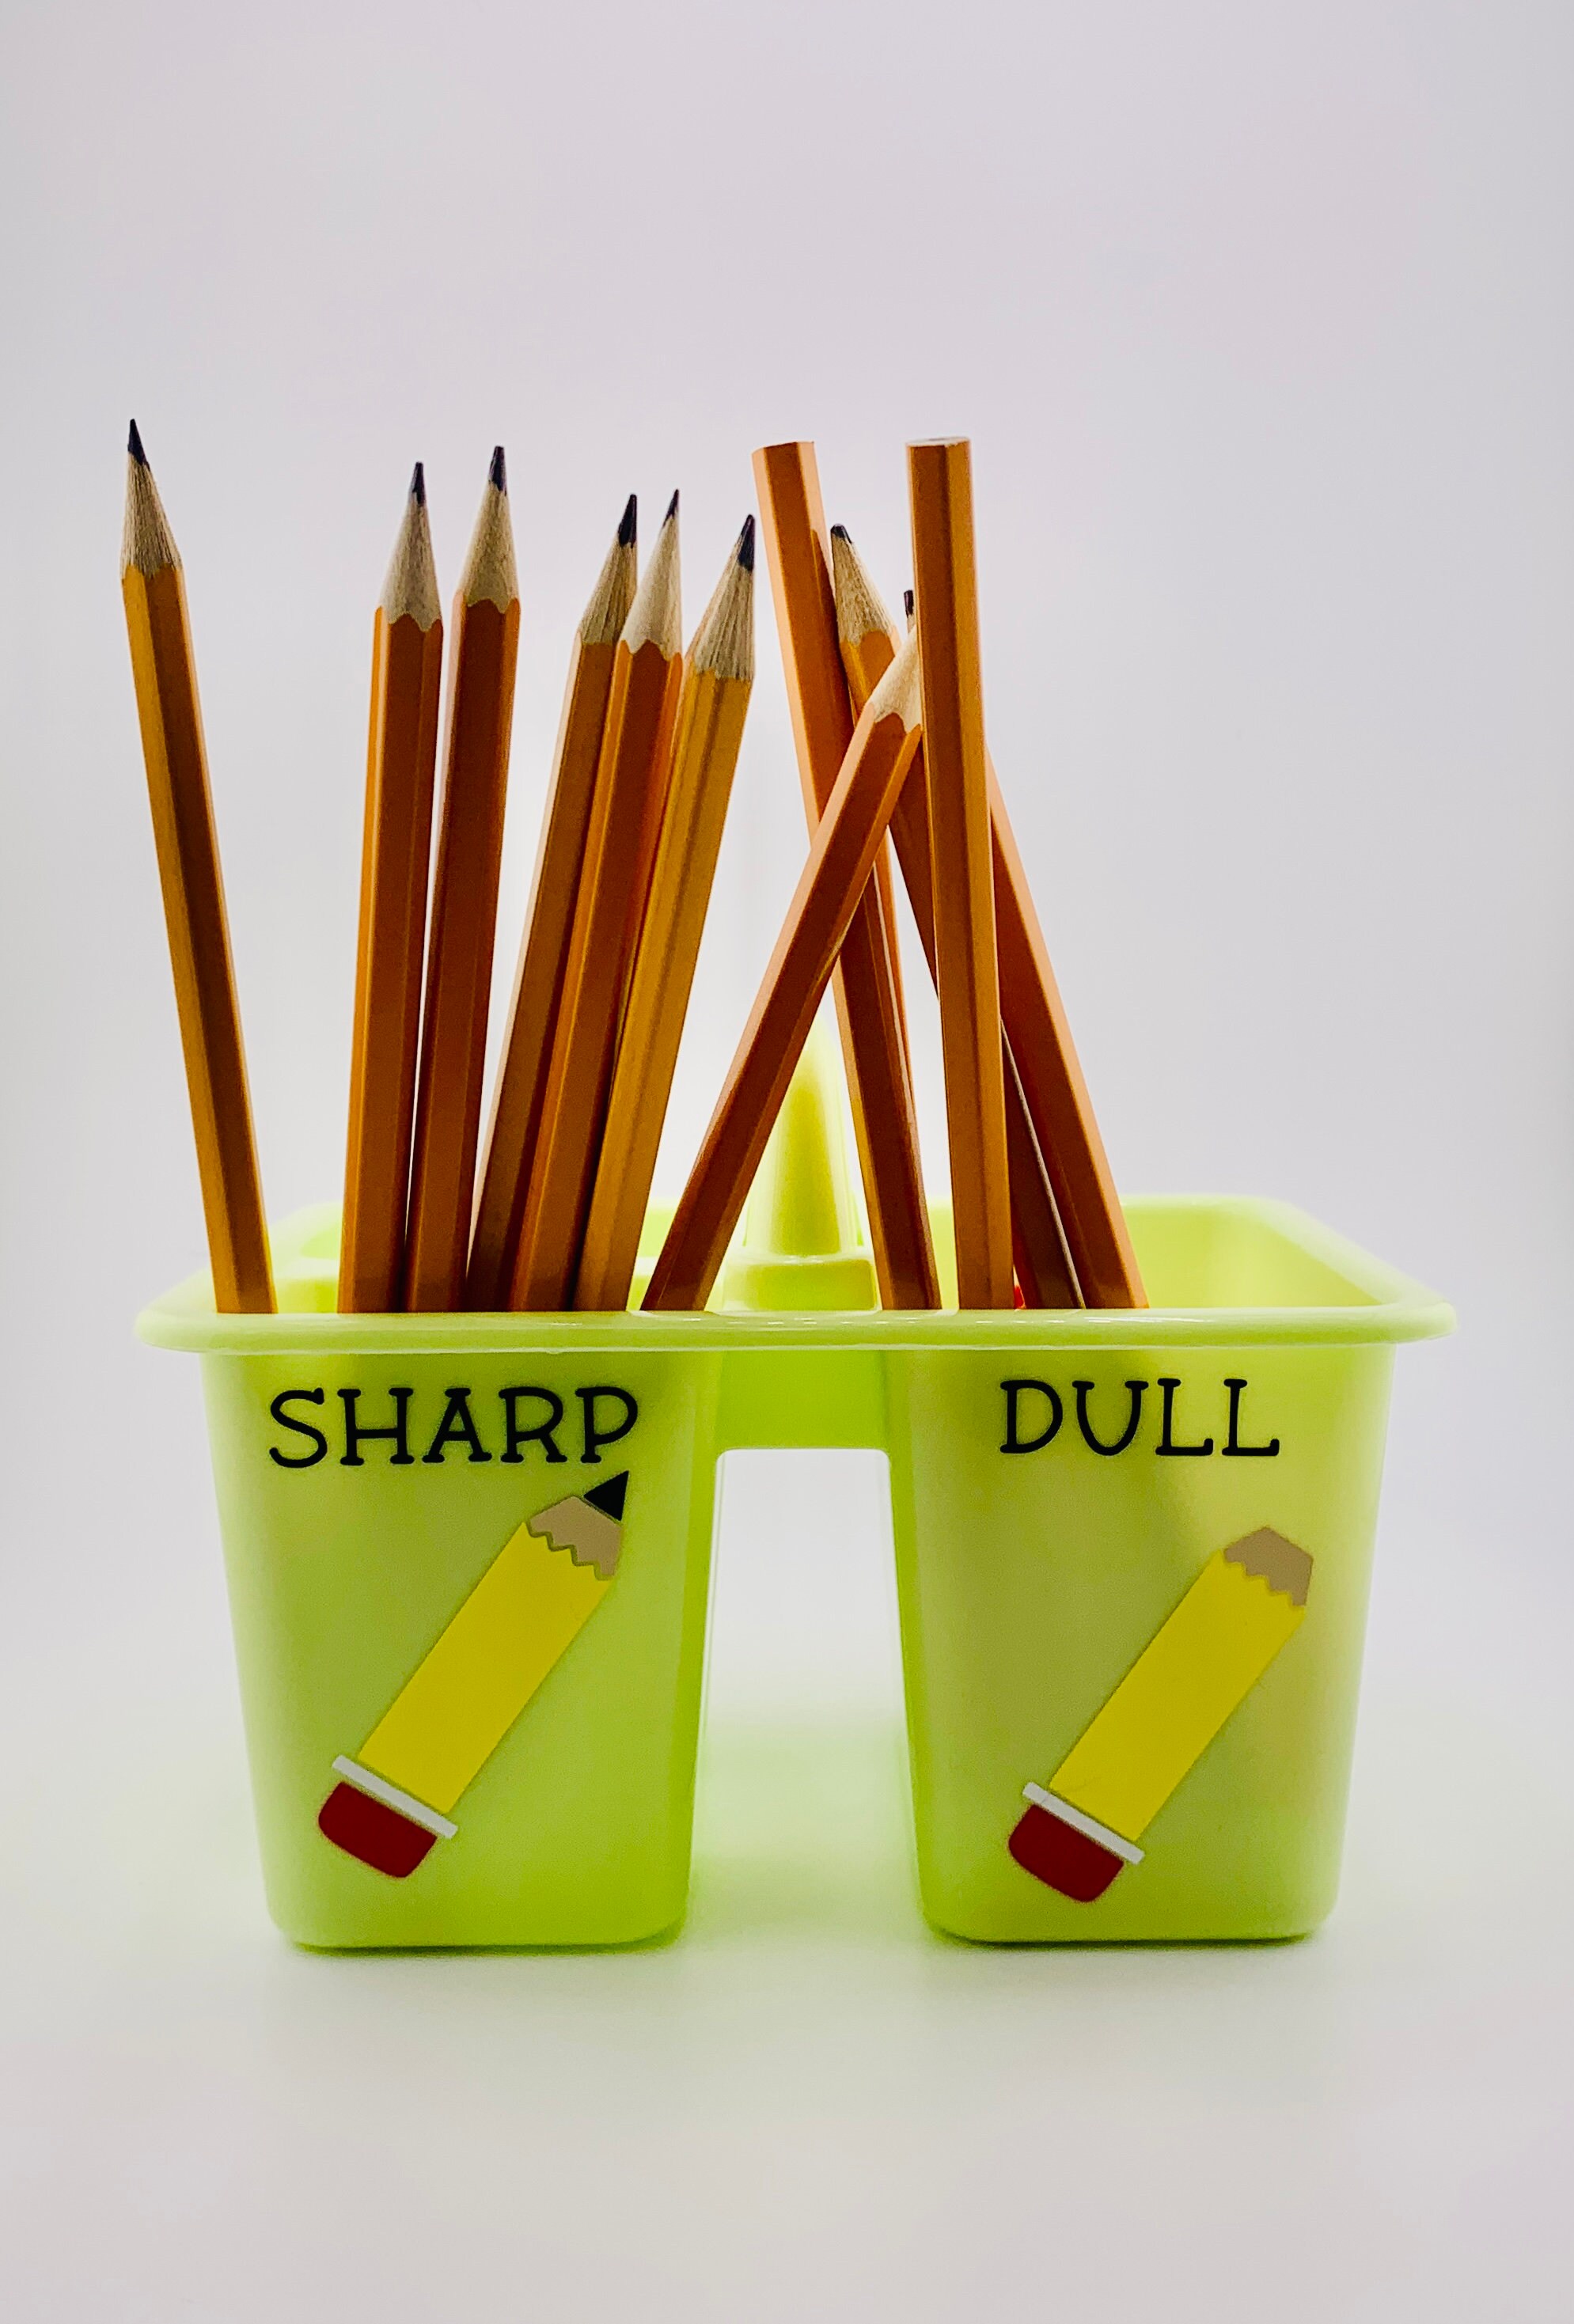  NILZA Sharp-Dull Pencil Holder,Pencil Shaped Pen Holder,Funny  Pencil Storage Organizer Pencil Container Dispenser,Pencil Holder for  Primary School Teachers Desk Gifts (Color : Green, Size : One Size) :  Office Products